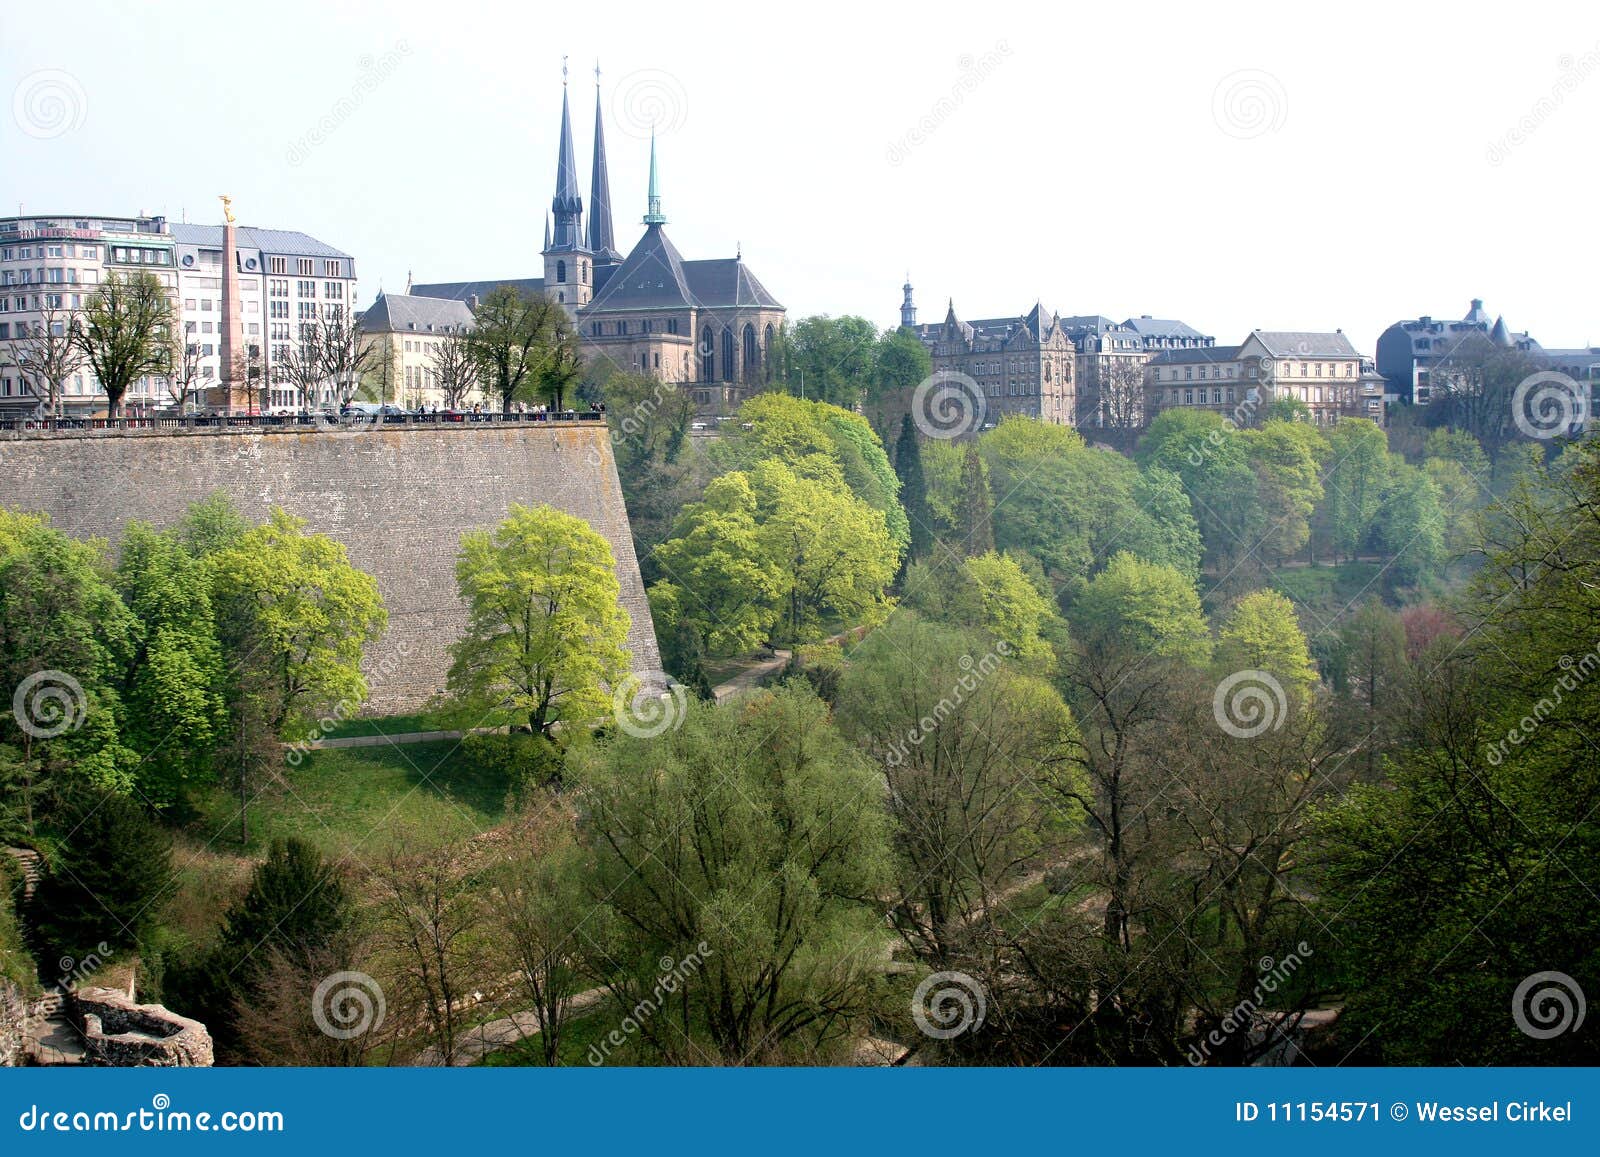 petrusse park and uptown of luxembourg city